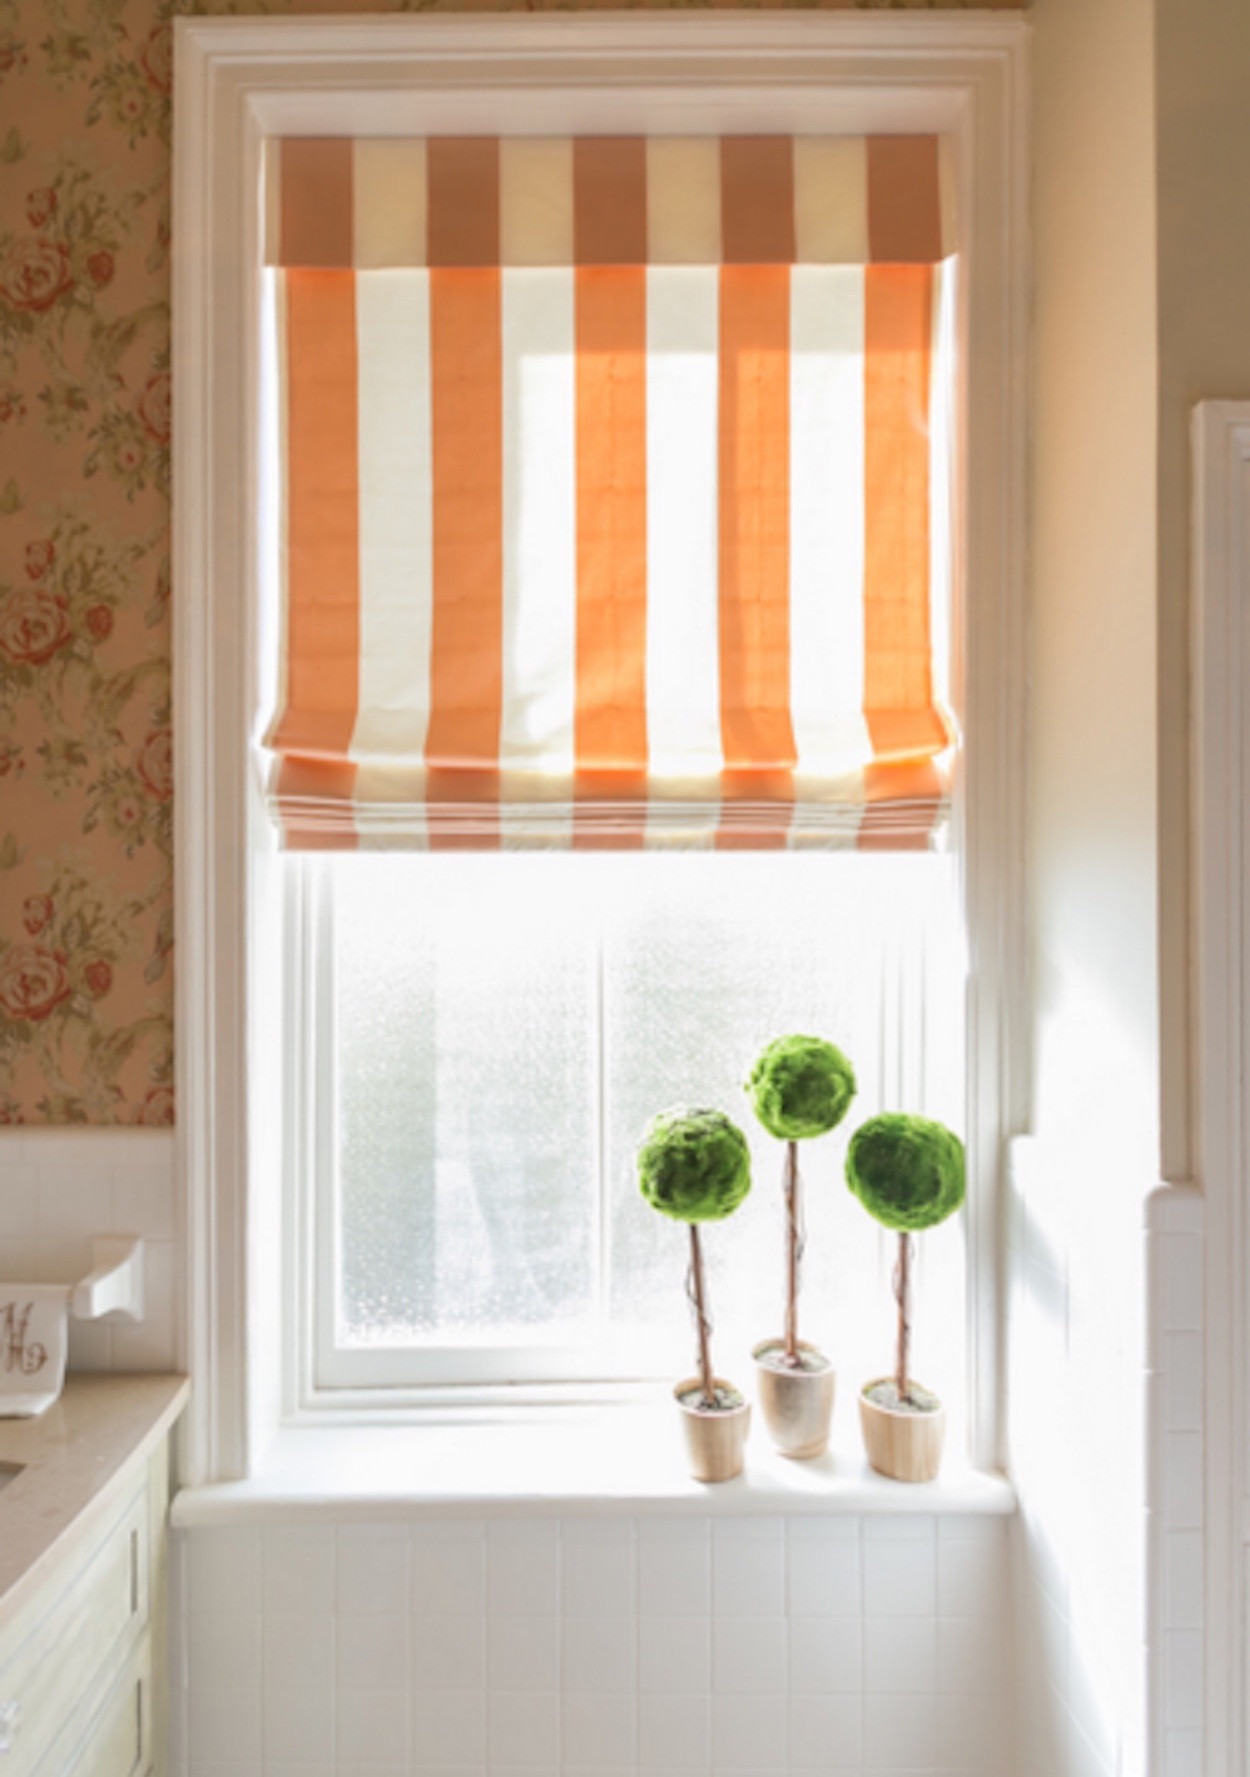 Bathroom Window Ideas Small Bathrooms
 7 Different Bathroom Window Treatments You Might Not Have